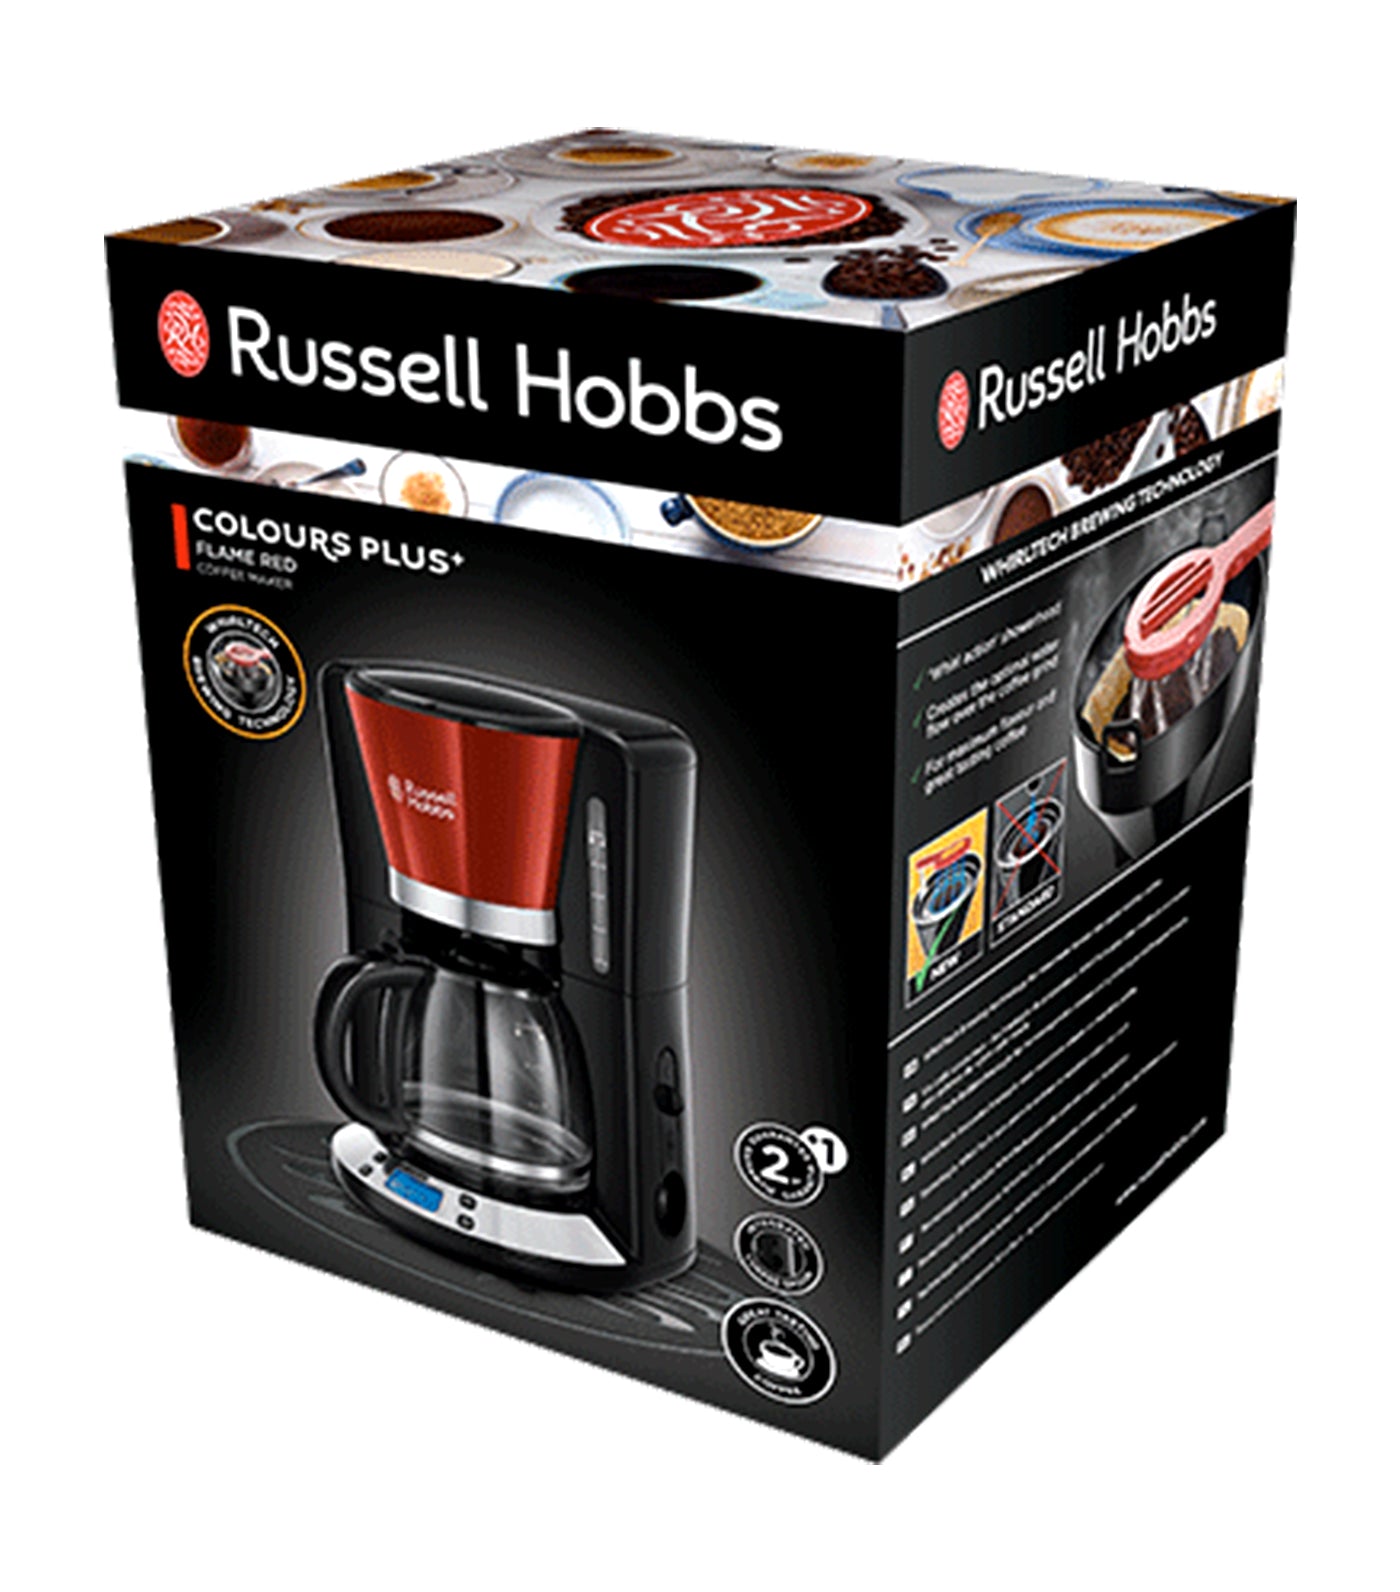 Colours Plus+ Coffee Maker - Flame Red